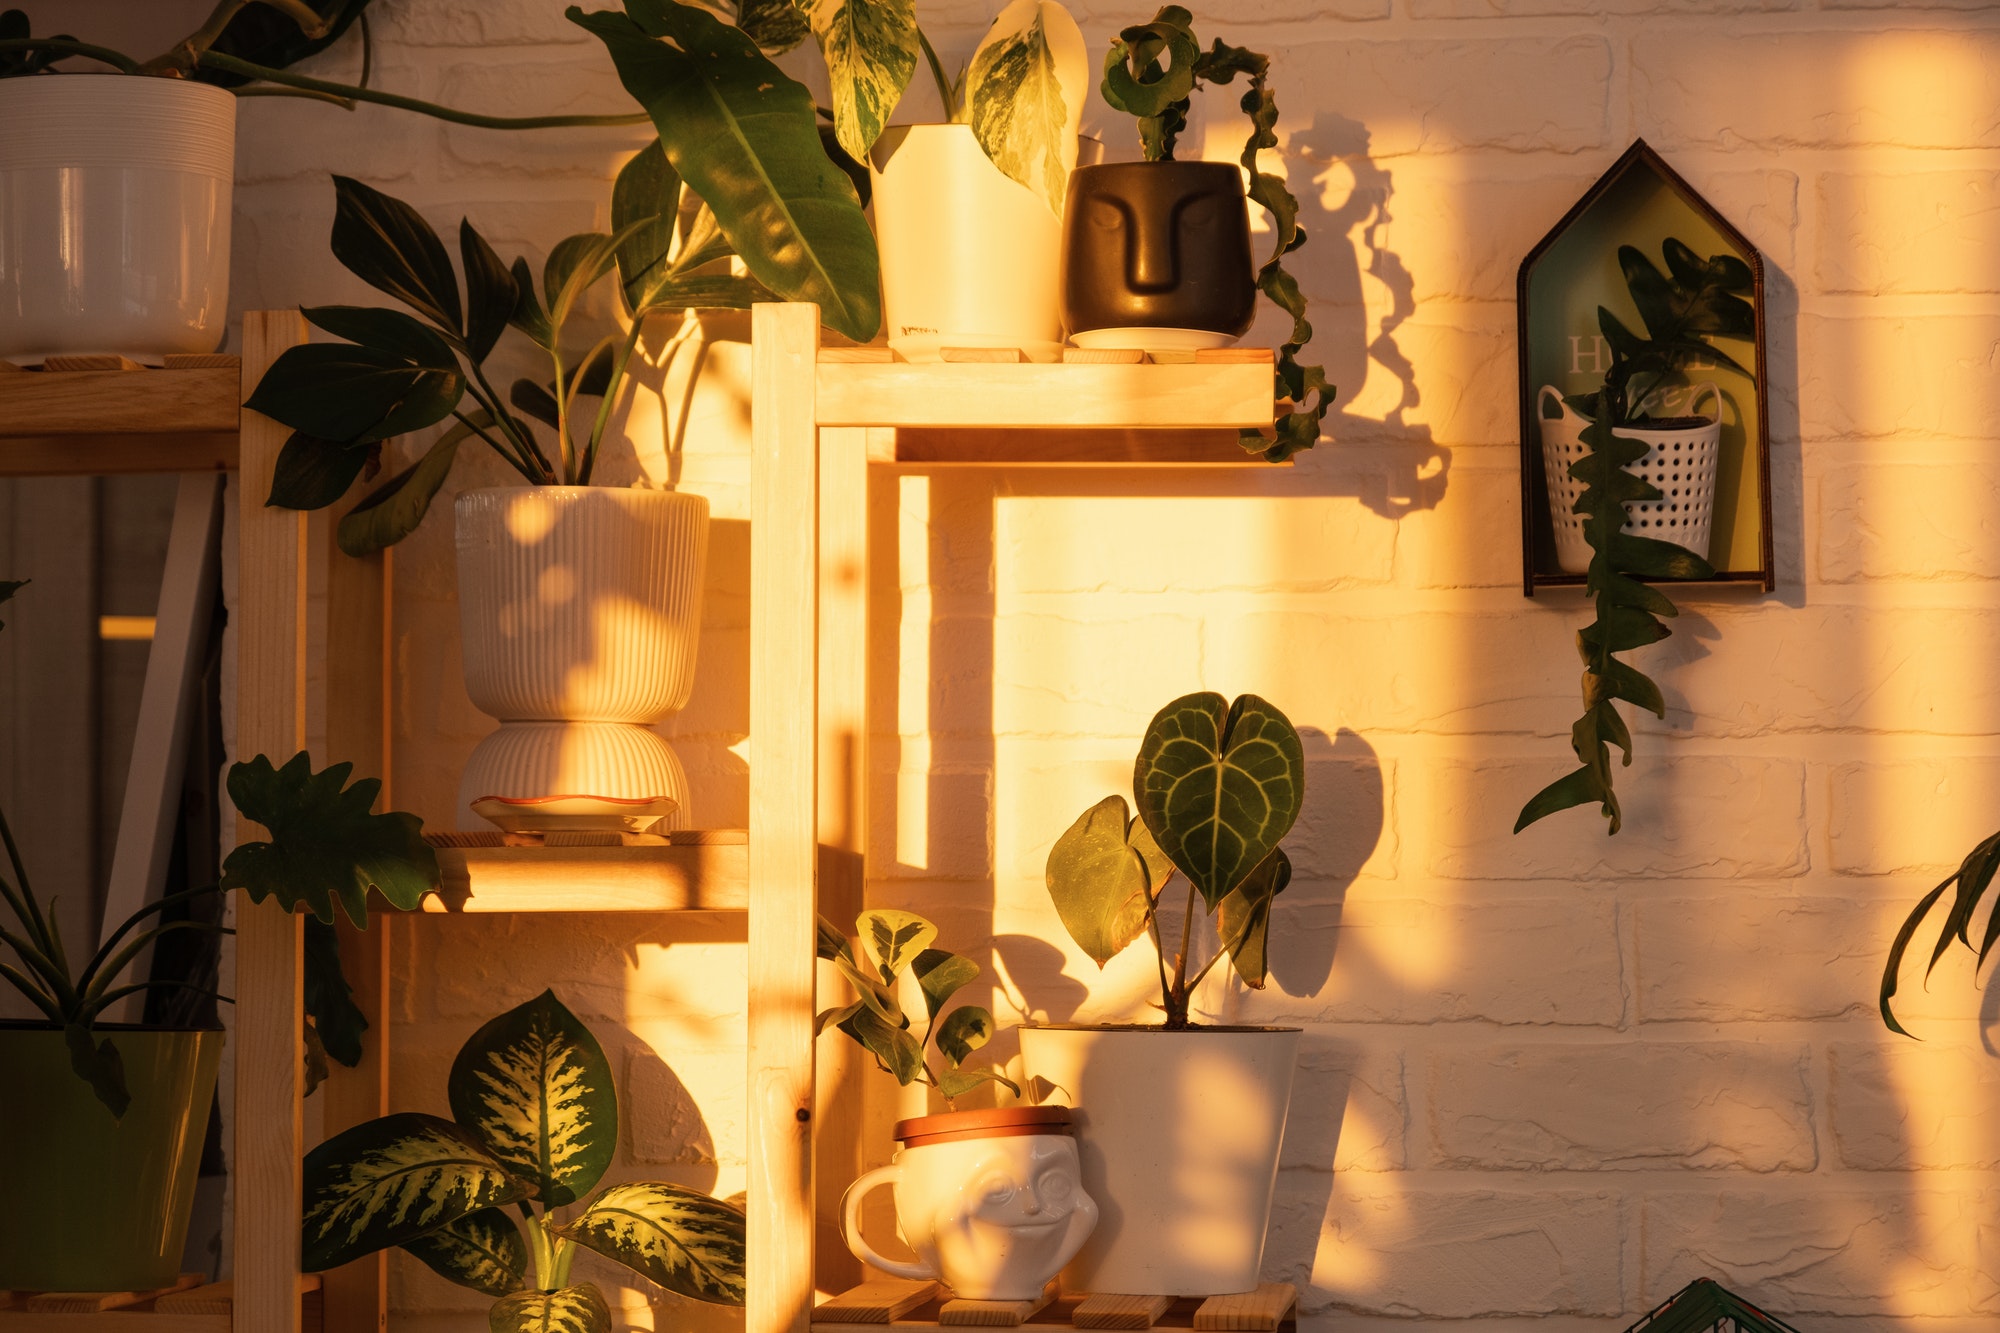 Shelving with a group of indoor plants in the interior in the evening light of the sun and the glare